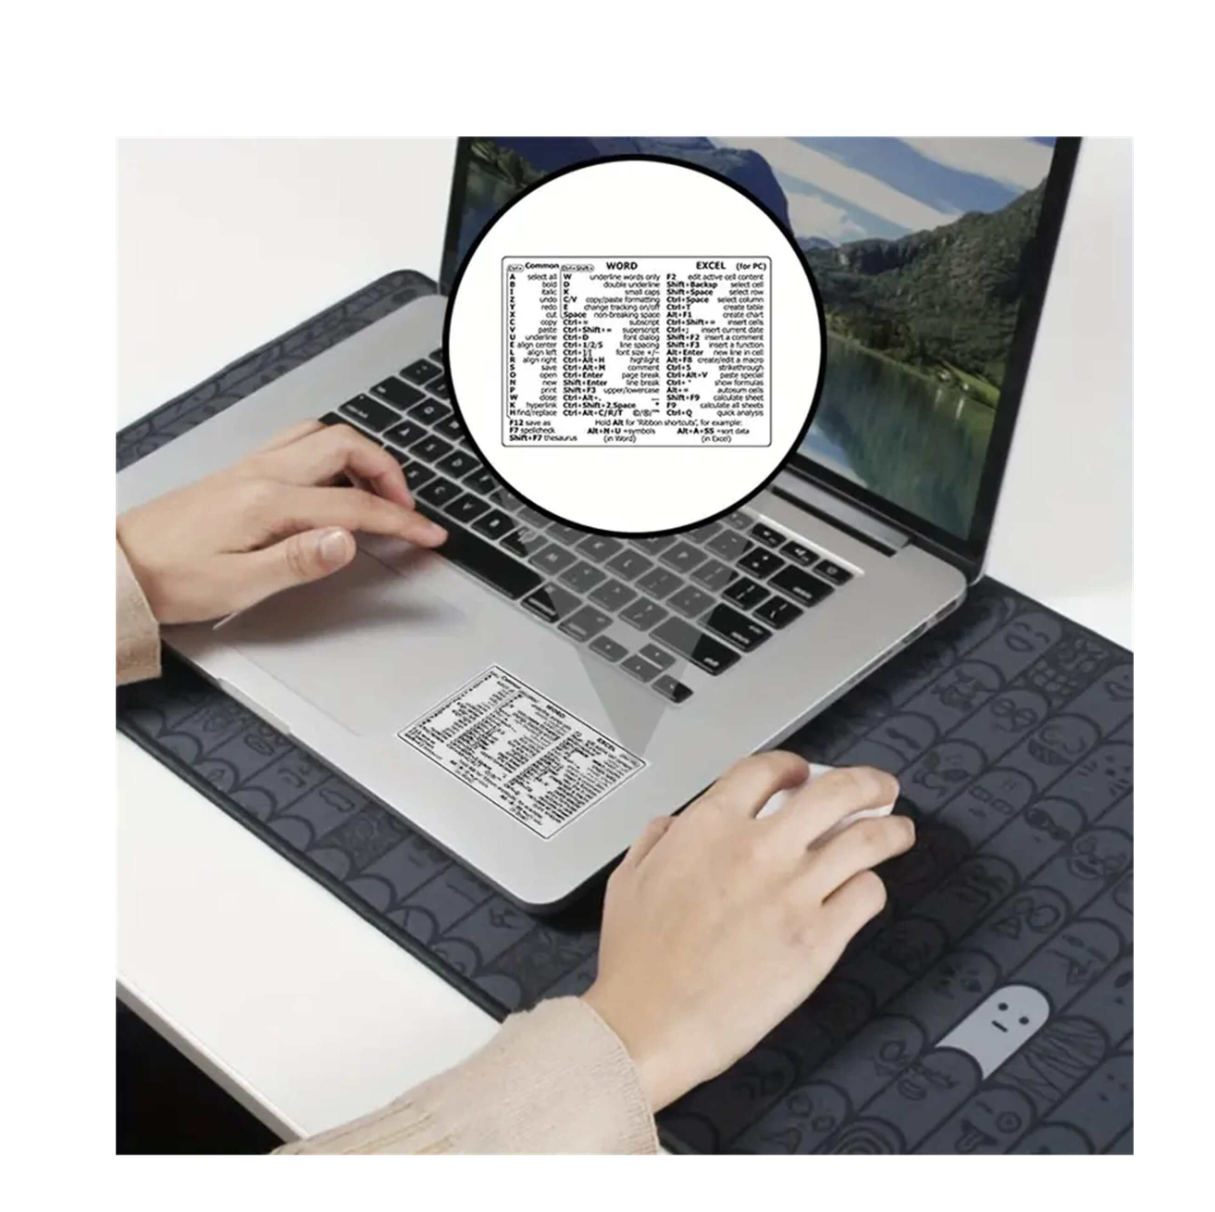 Effortless Efficiency: Master Word and Excel with our Ultimate Reference Keyboard Shortcut Sticker for Your Laptop!